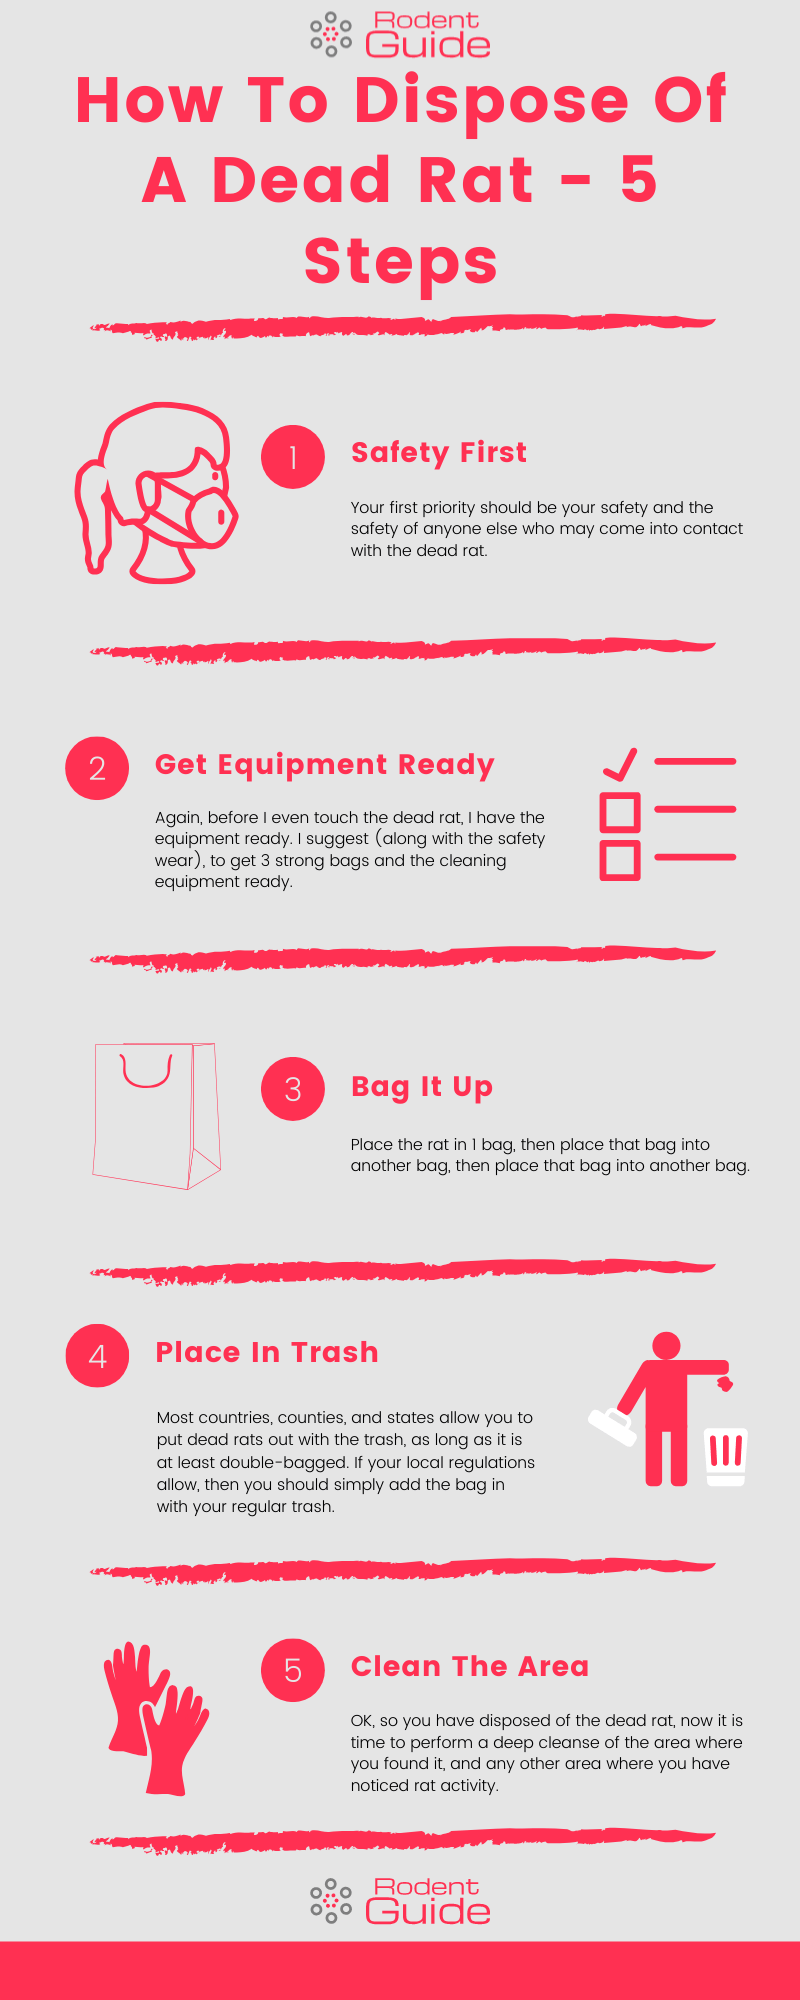 How To Dispose Of A Dead Rat Infographic